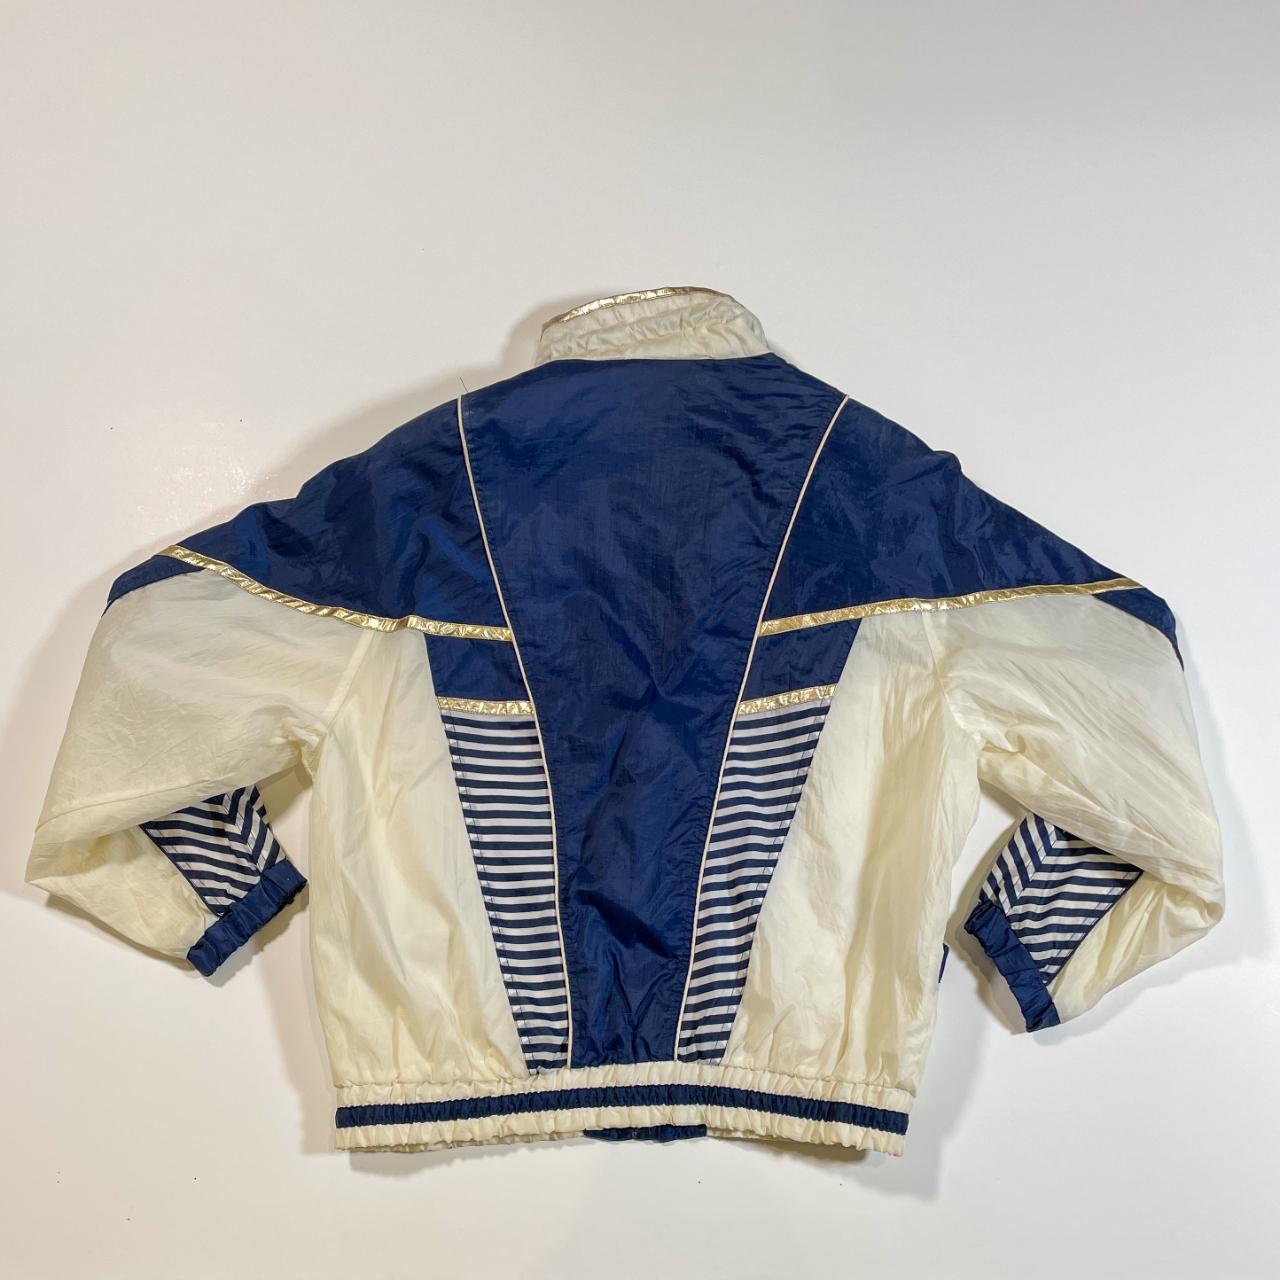 East West Women's Navy and Gold Jacket (2)